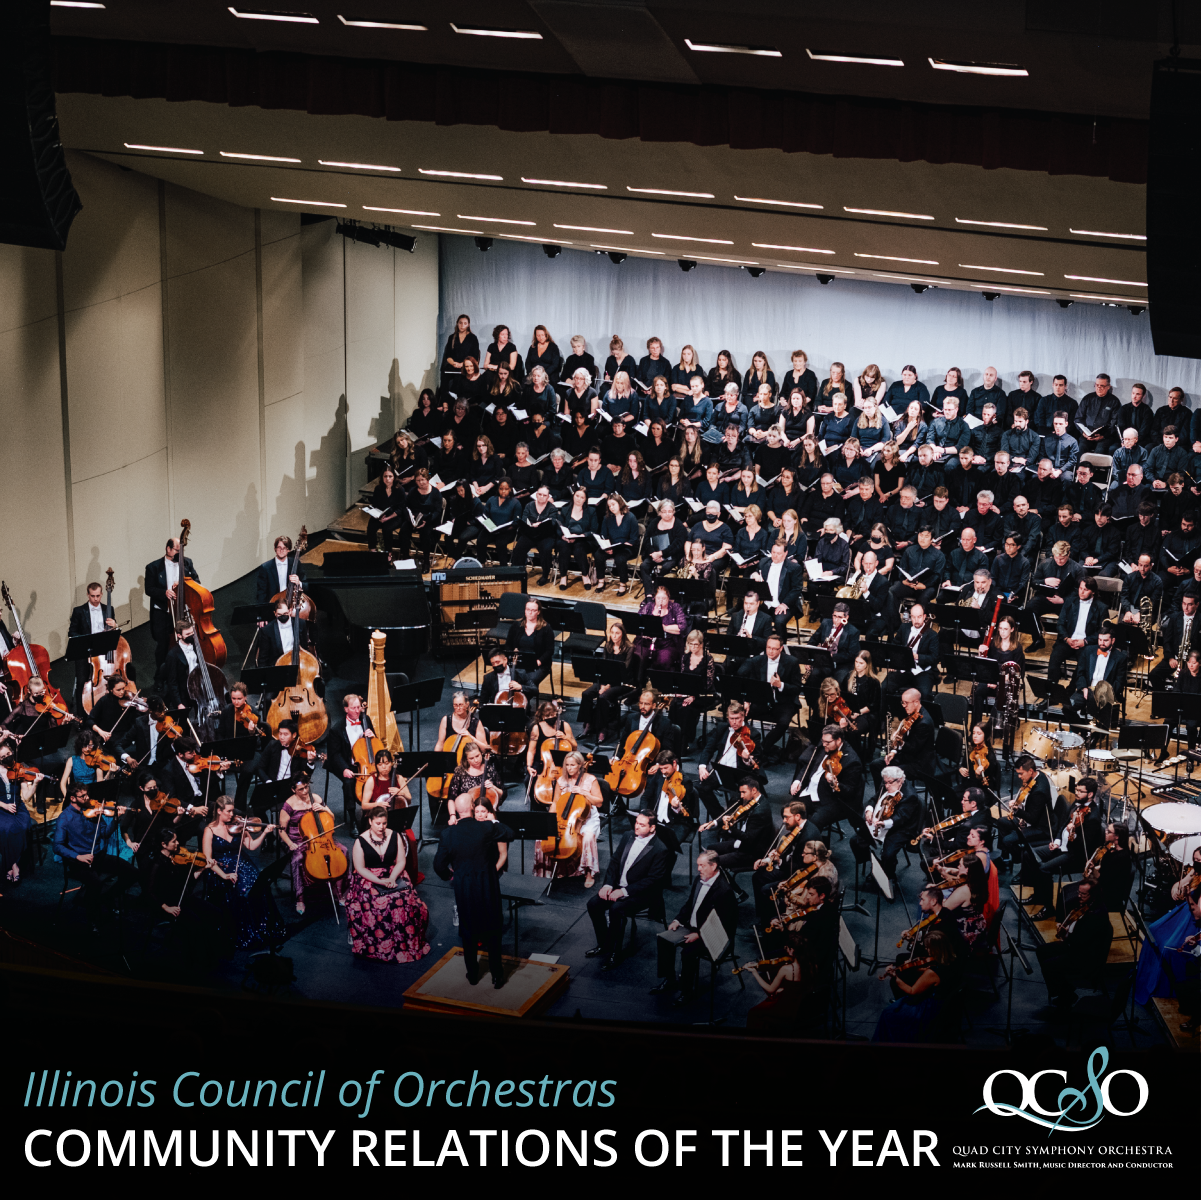 QCSO Awarded Community Relations of the Year by Illinois Council Of Orchestras